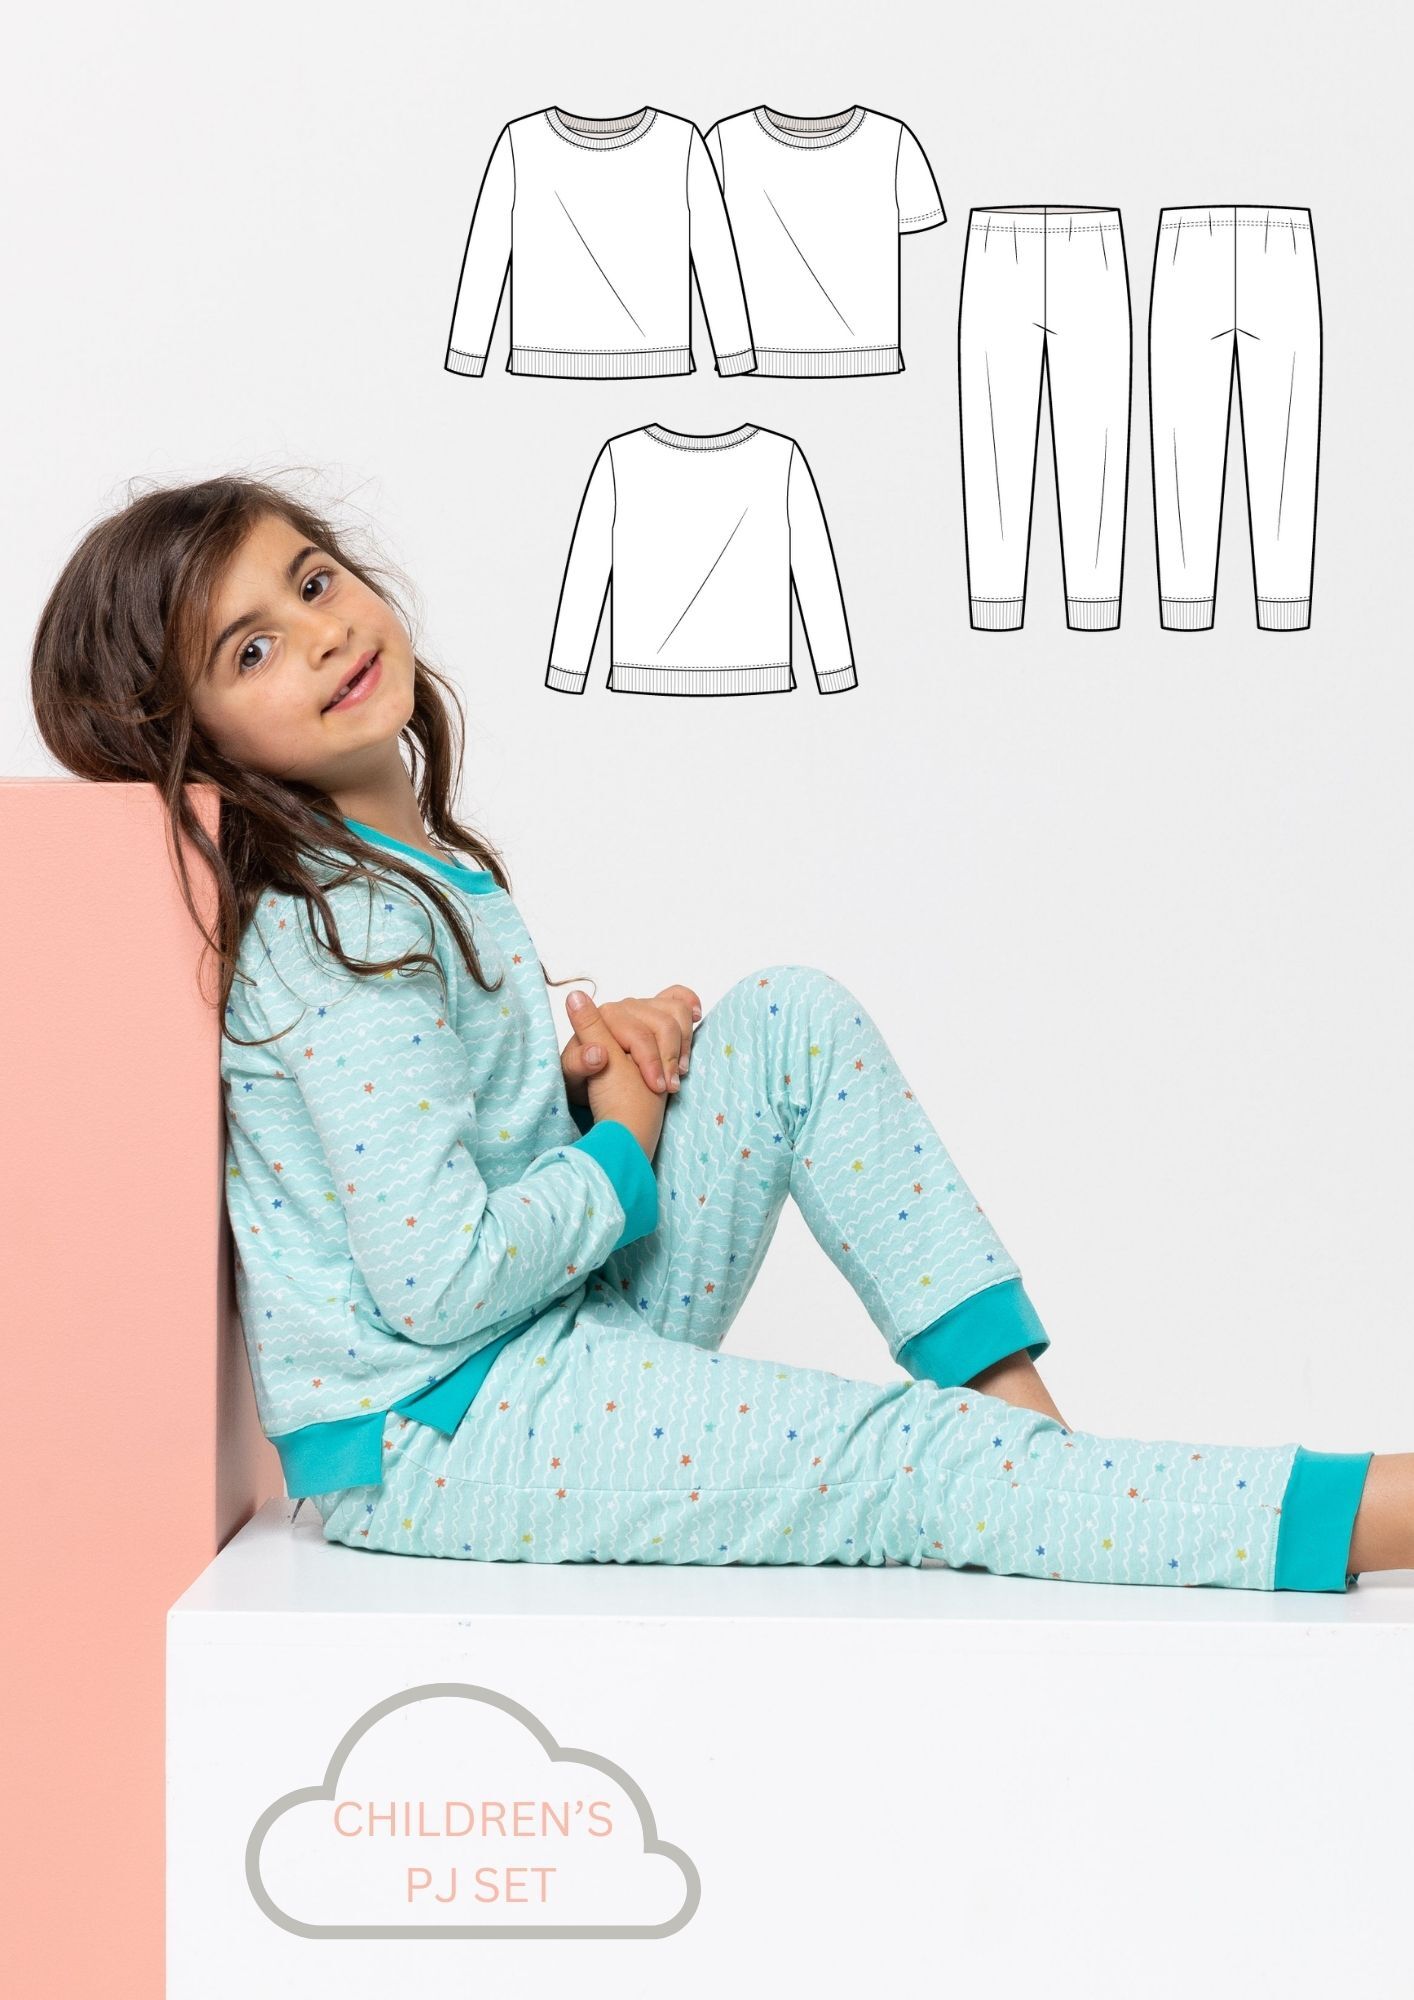 Or choose the Children's PJ Set as your free pattern with any order until November 30!